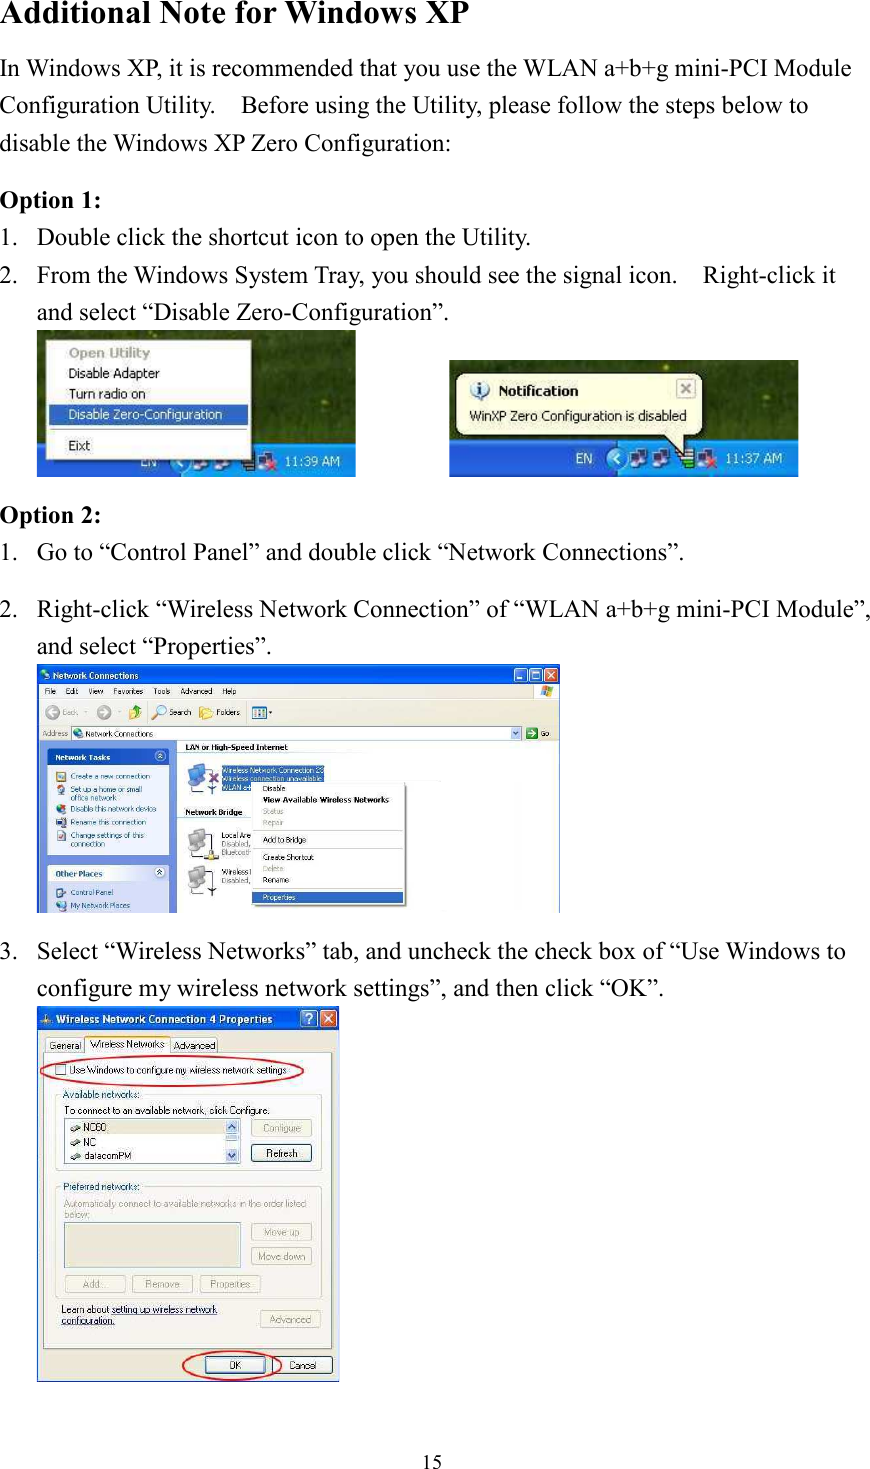 15Additional Note for Windows XP   In Windows XP, it is recommended that you use the WLAN a+b+g mini-PCI Module Configuration Utility.    Before using the Utility, please follow the steps below to disable the Windows XP Zero Configuration: Option 1: 1. Double click the shortcut icon to open the Utility.2. From the Windows System Tray, you should see the signal icon.    Right-click it and select “Disable Zero-Configuration”.    Option 2: 1. Go to “Control Panel” and double click “Network Connections”. 2. Right-click “Wireless Network Connection” of “WLAN a+b+g mini-PCI Module”, and select “Properties”. 3. Select “Wireless Networks” tab, and uncheck the check box of “Use Windows to configure my wireless network settings”, and then click “OK”. 